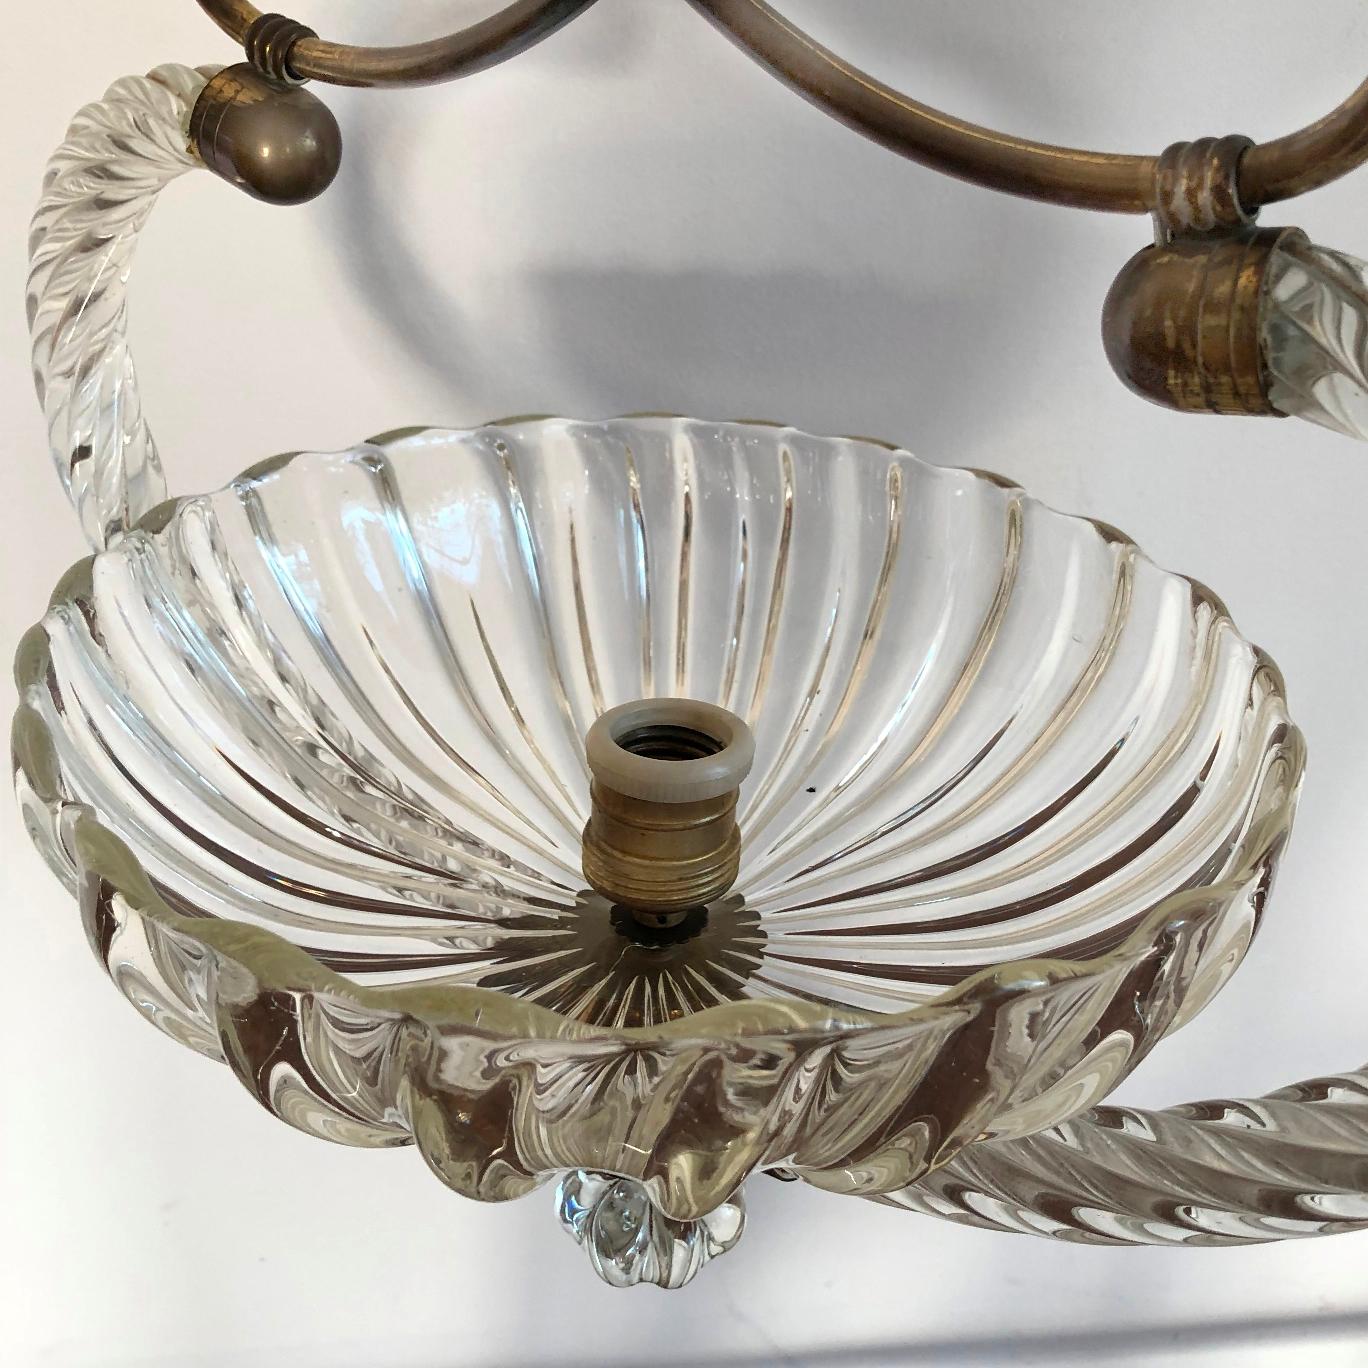 Ercole Barovier Murano Chandelier, Italy, 1940s For Sale 2